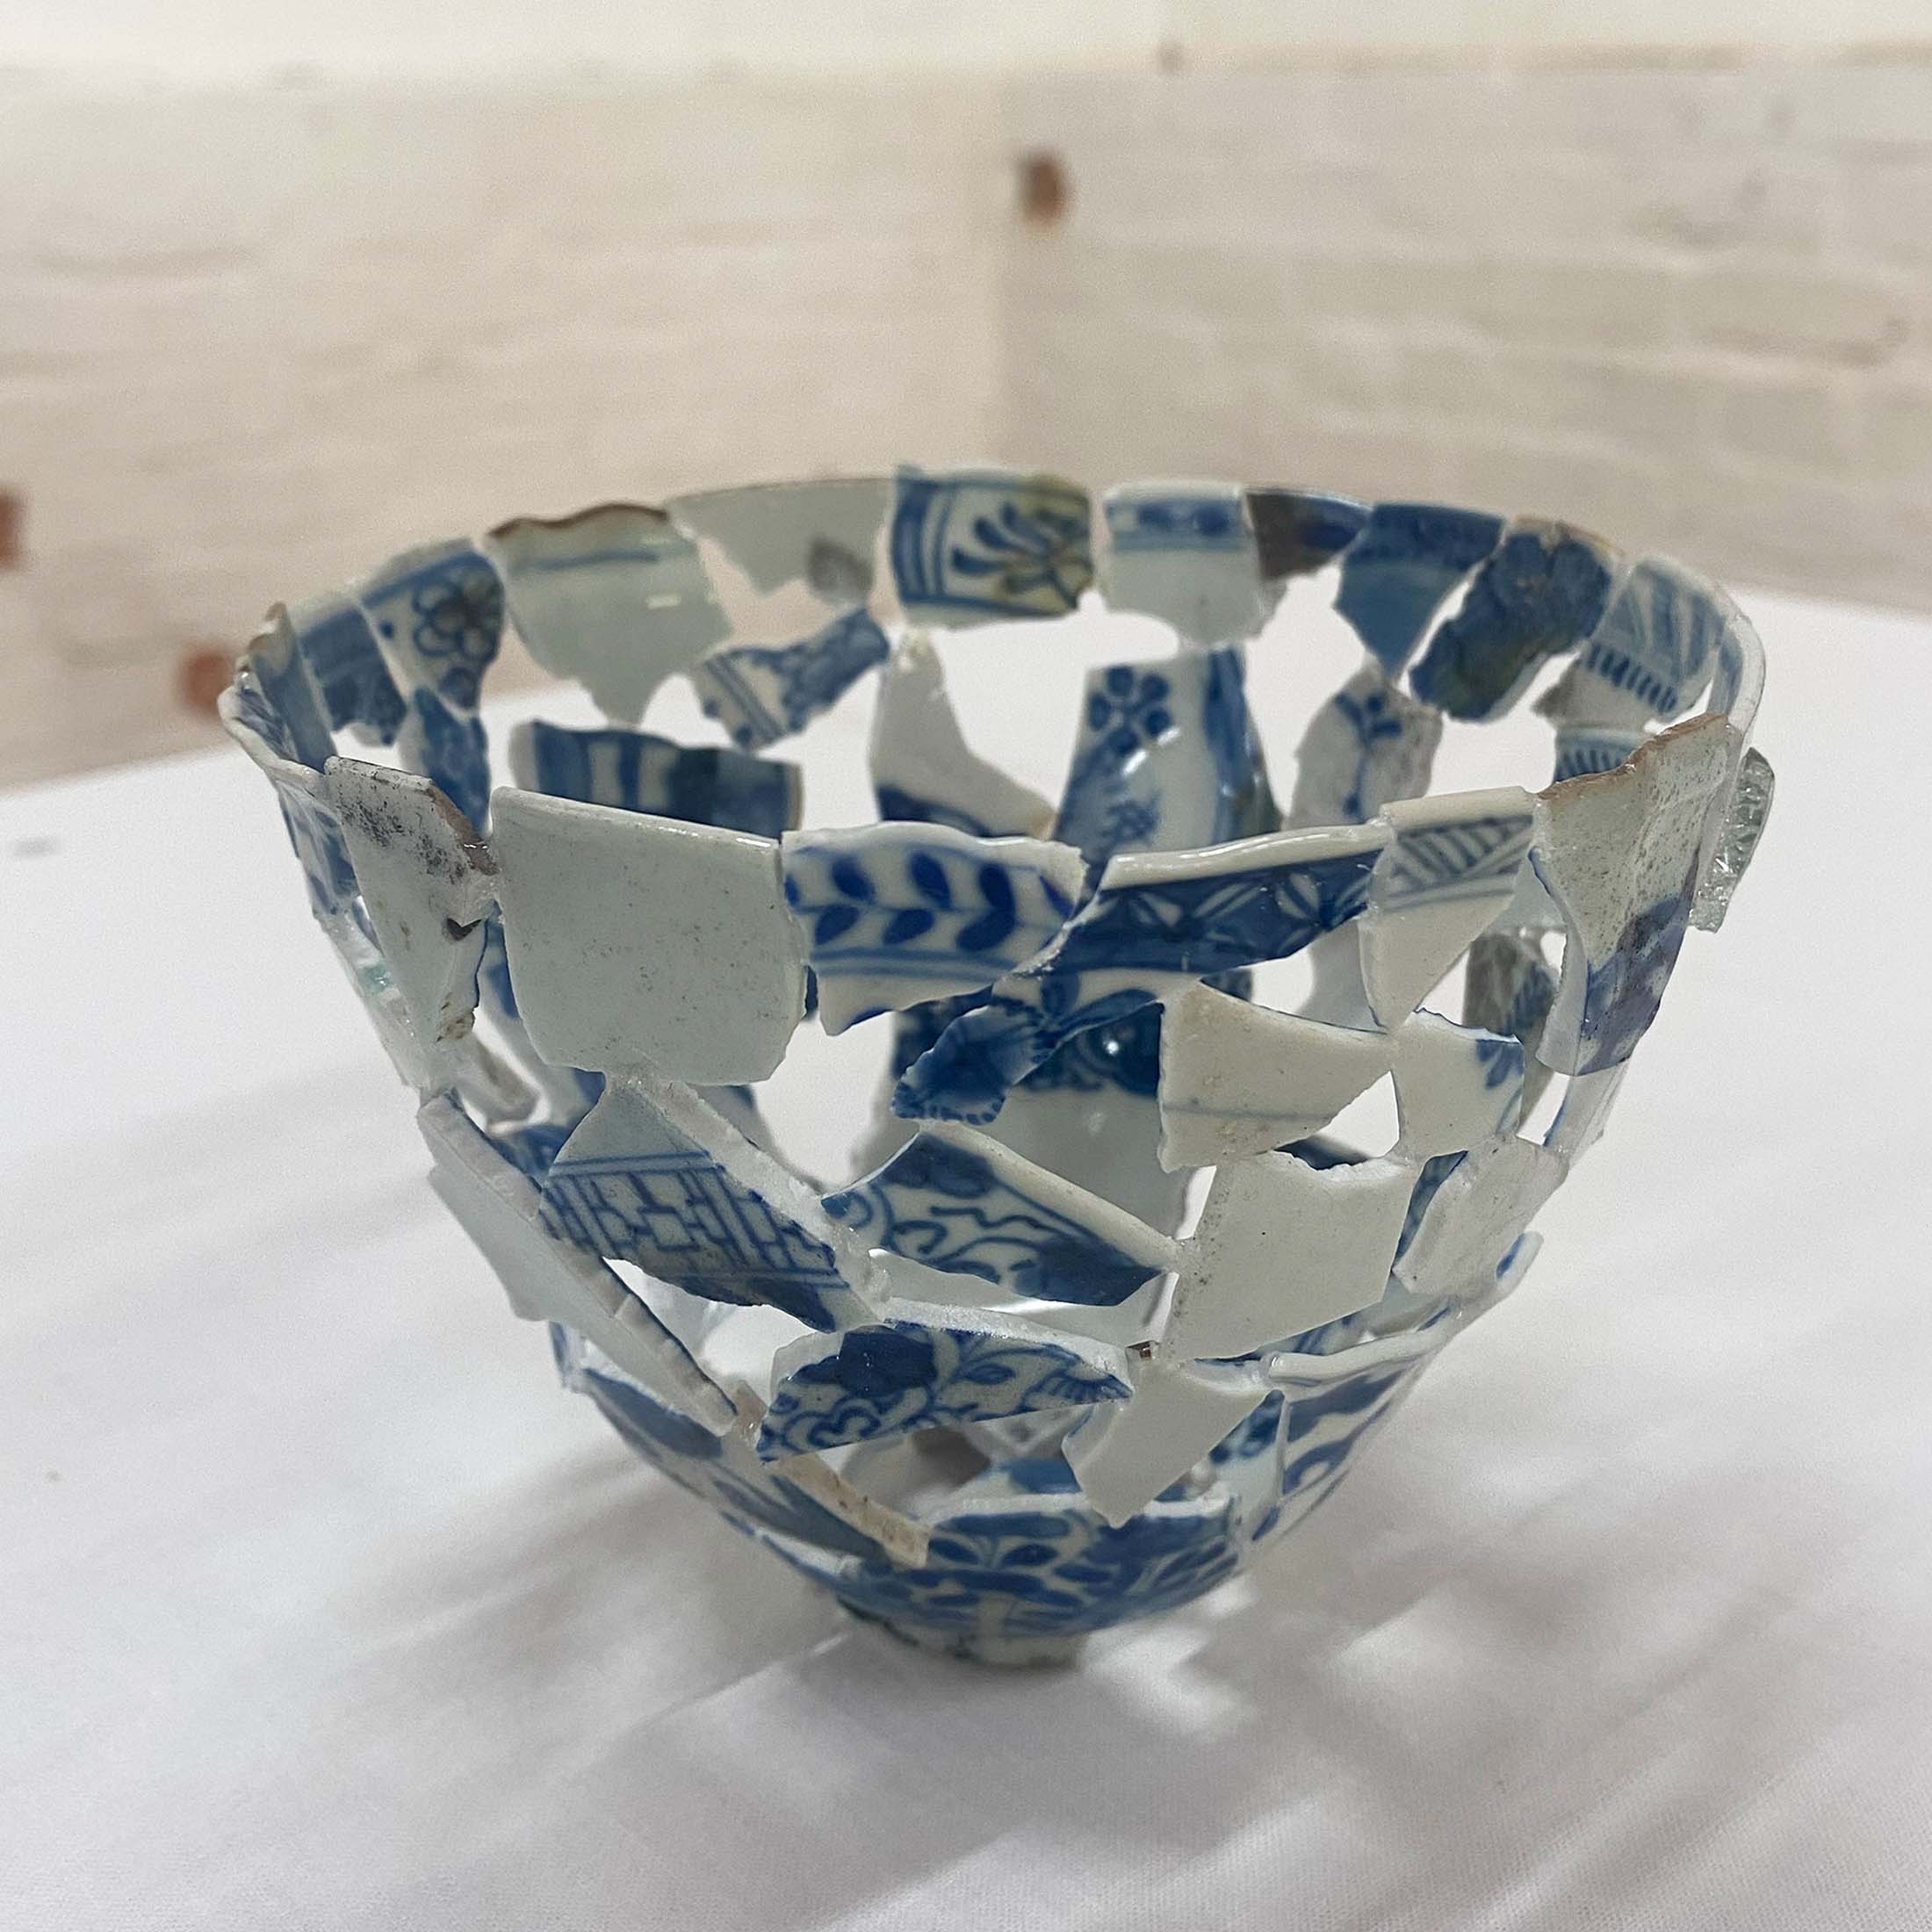 The 'Fire Vase 3' by Tamlin Blake in her 'After the Fire' exhibition, crafted from fractured china plates, representing a resilient beauty and the theme of reflecting history through art at Cape Heritage Hotel.